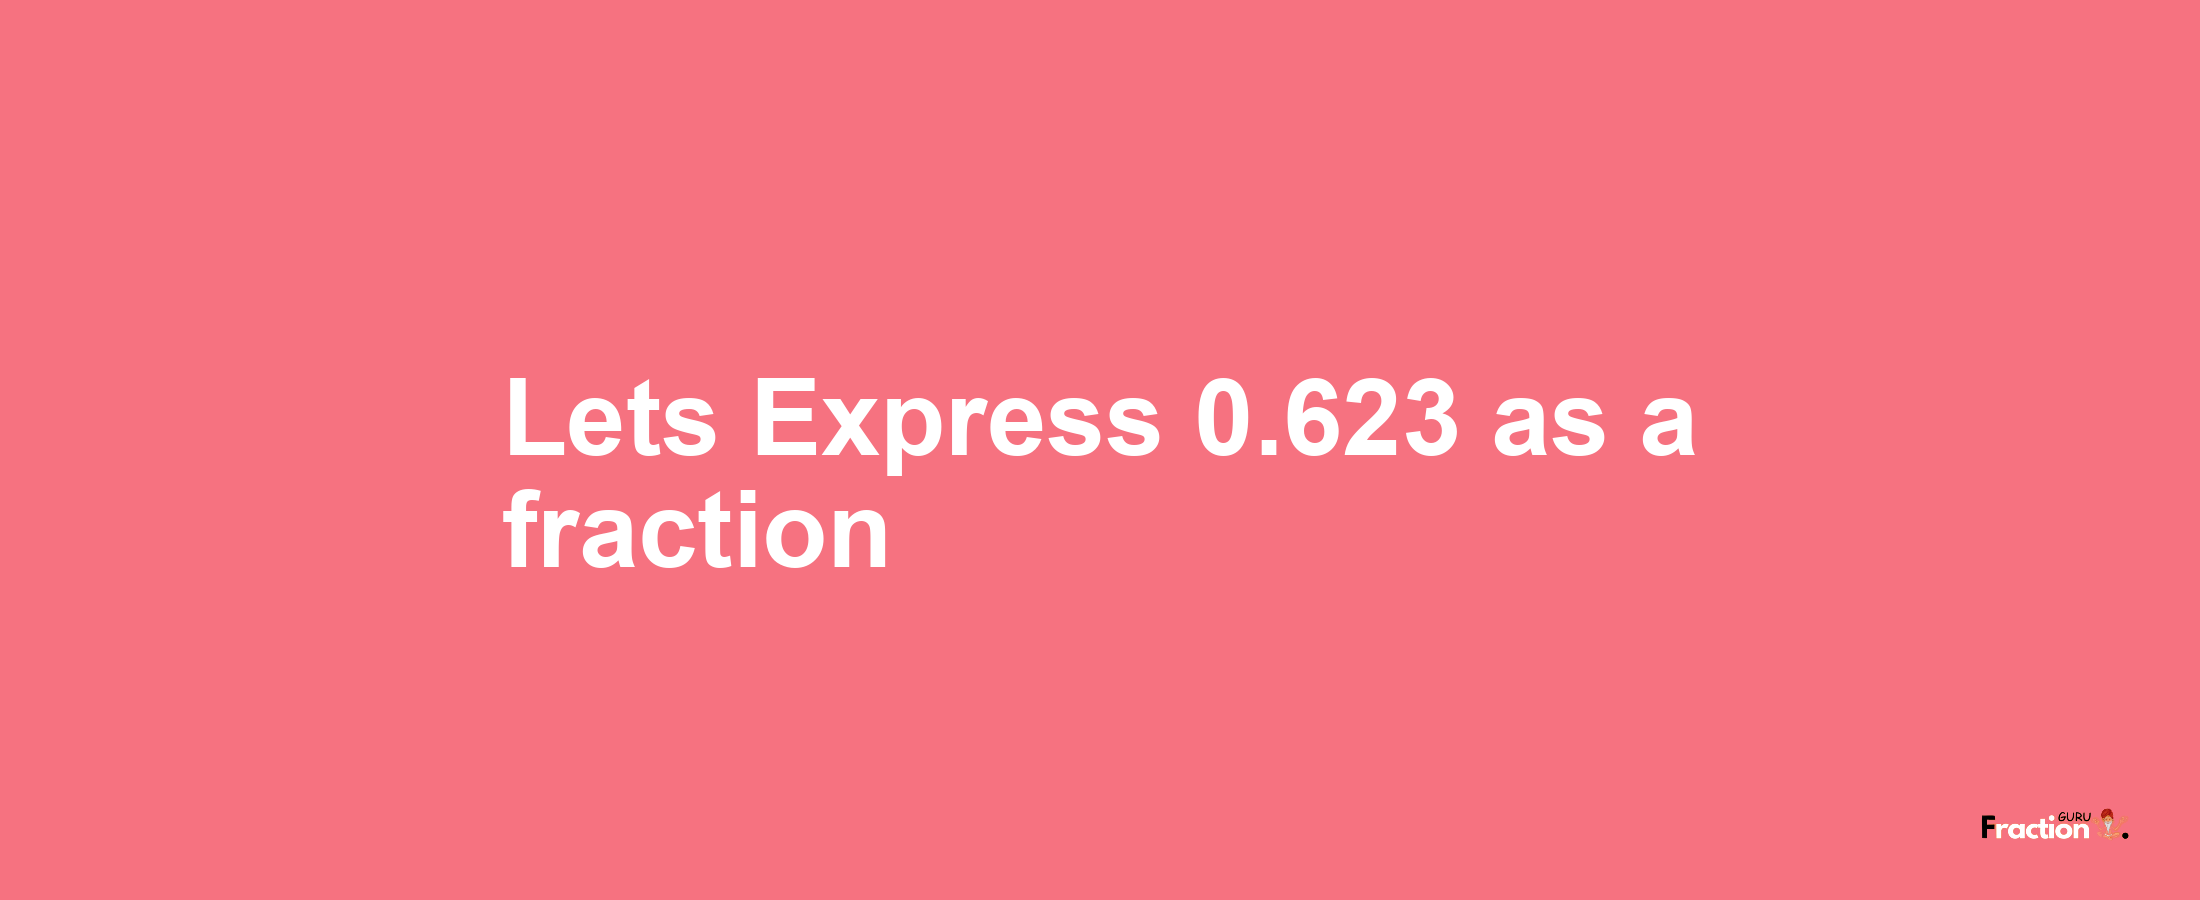 Lets Express 0.623 as afraction